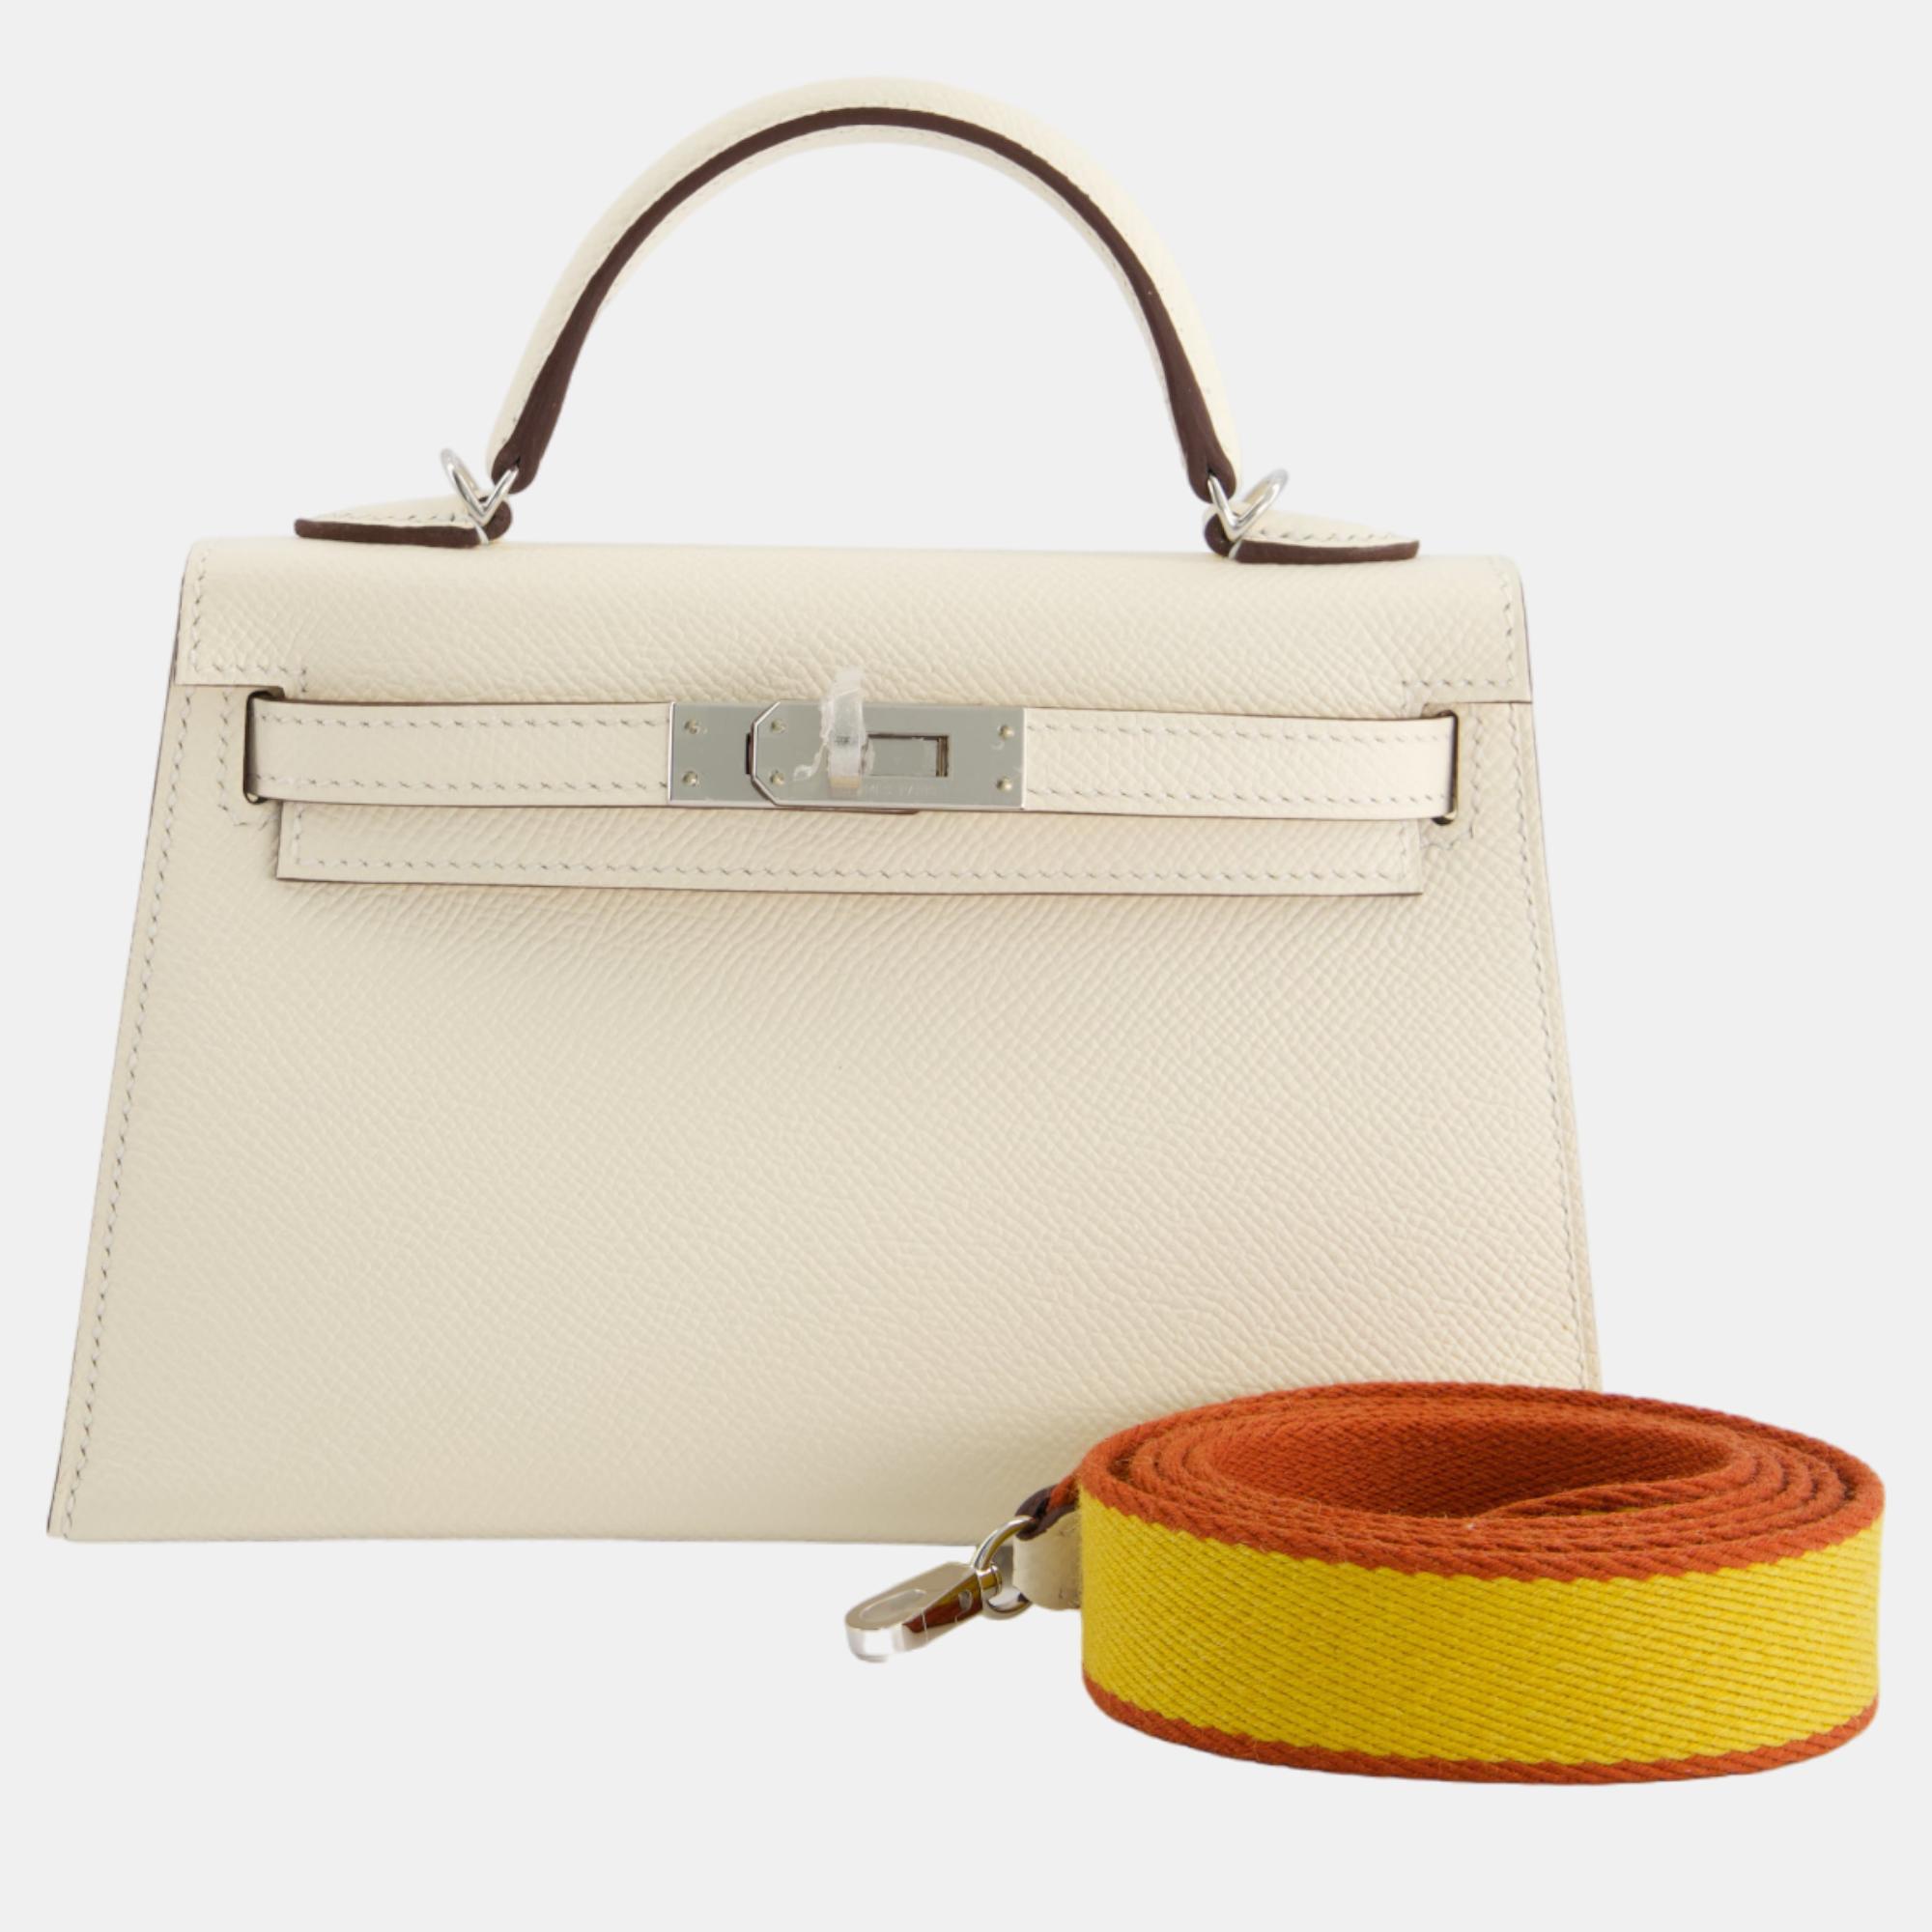 Hermes Mini Kelly II Sellier 20cm In Nata Epsom Leather With Palladium Hardware & Fabric Strap In Jaune & Ambre-Brique